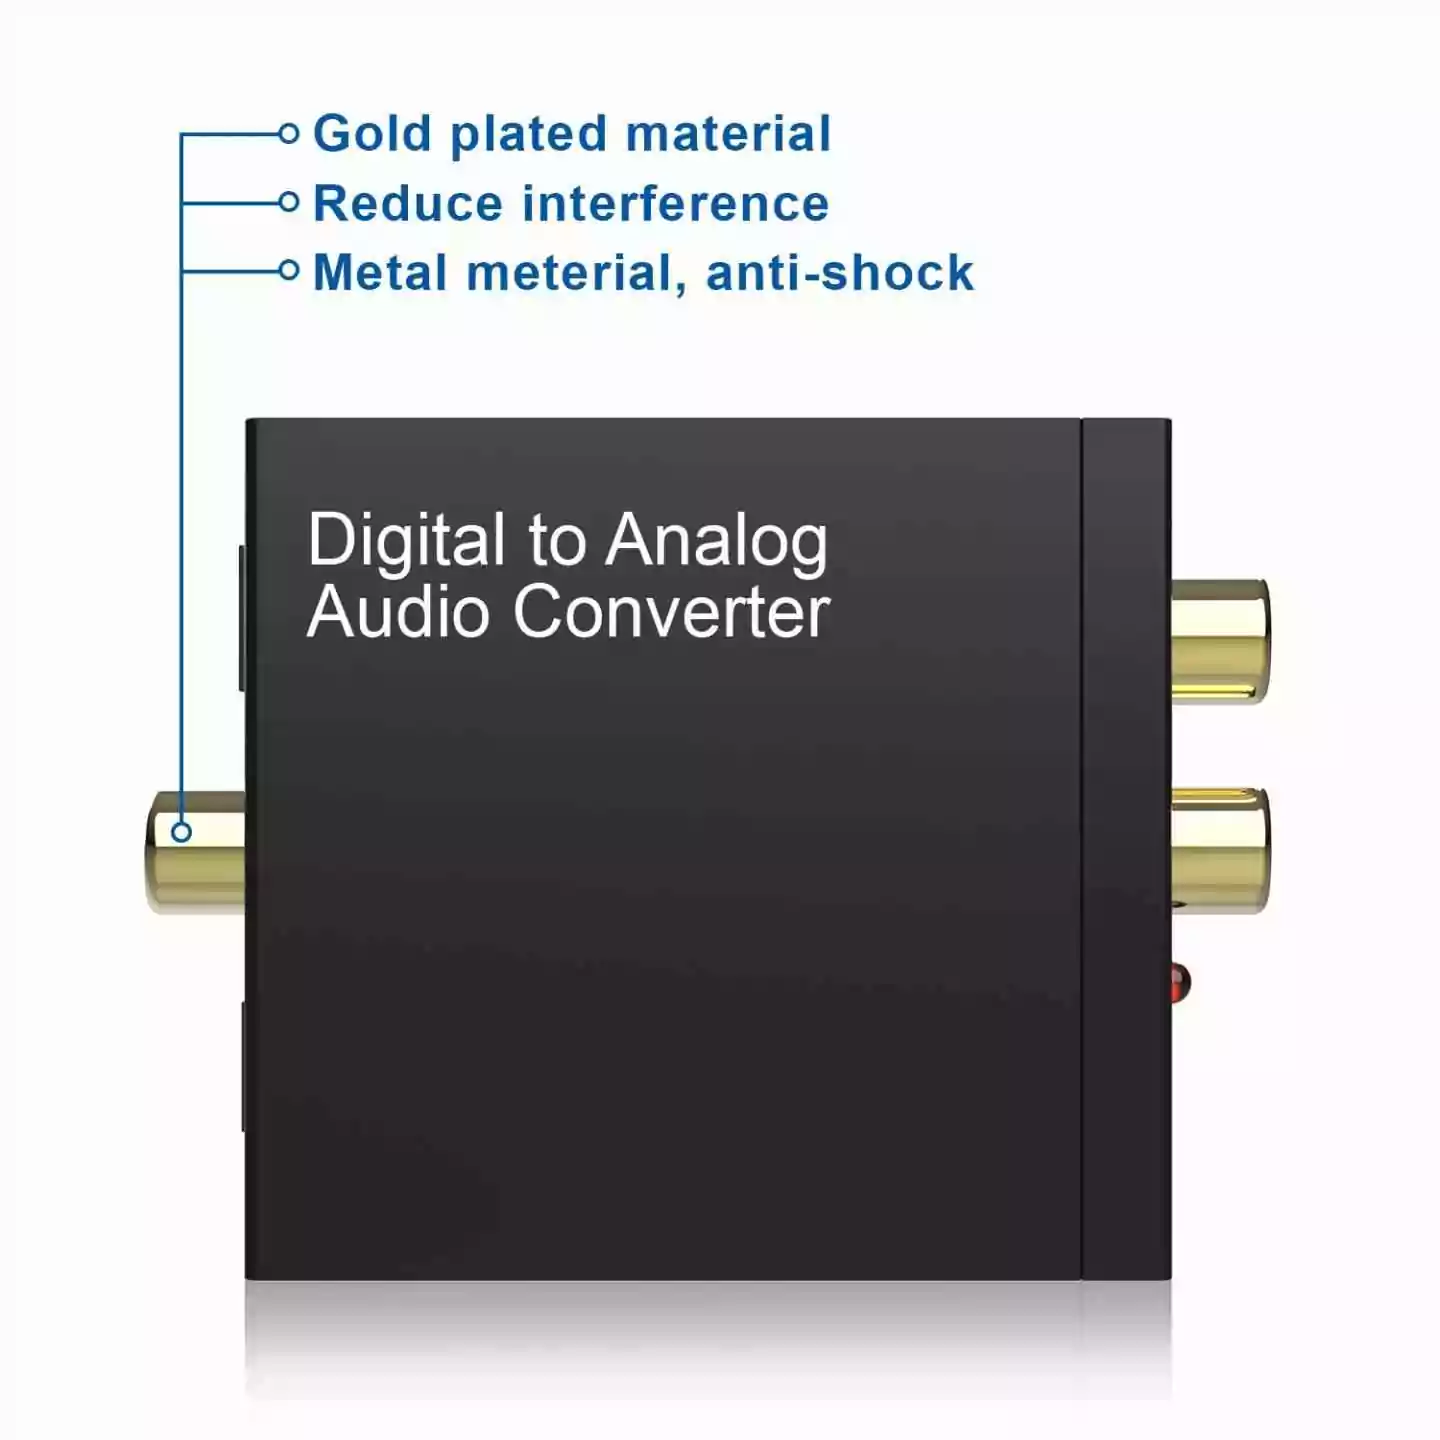 Coaxial or Toslink digital audio signals to analog L/R audio